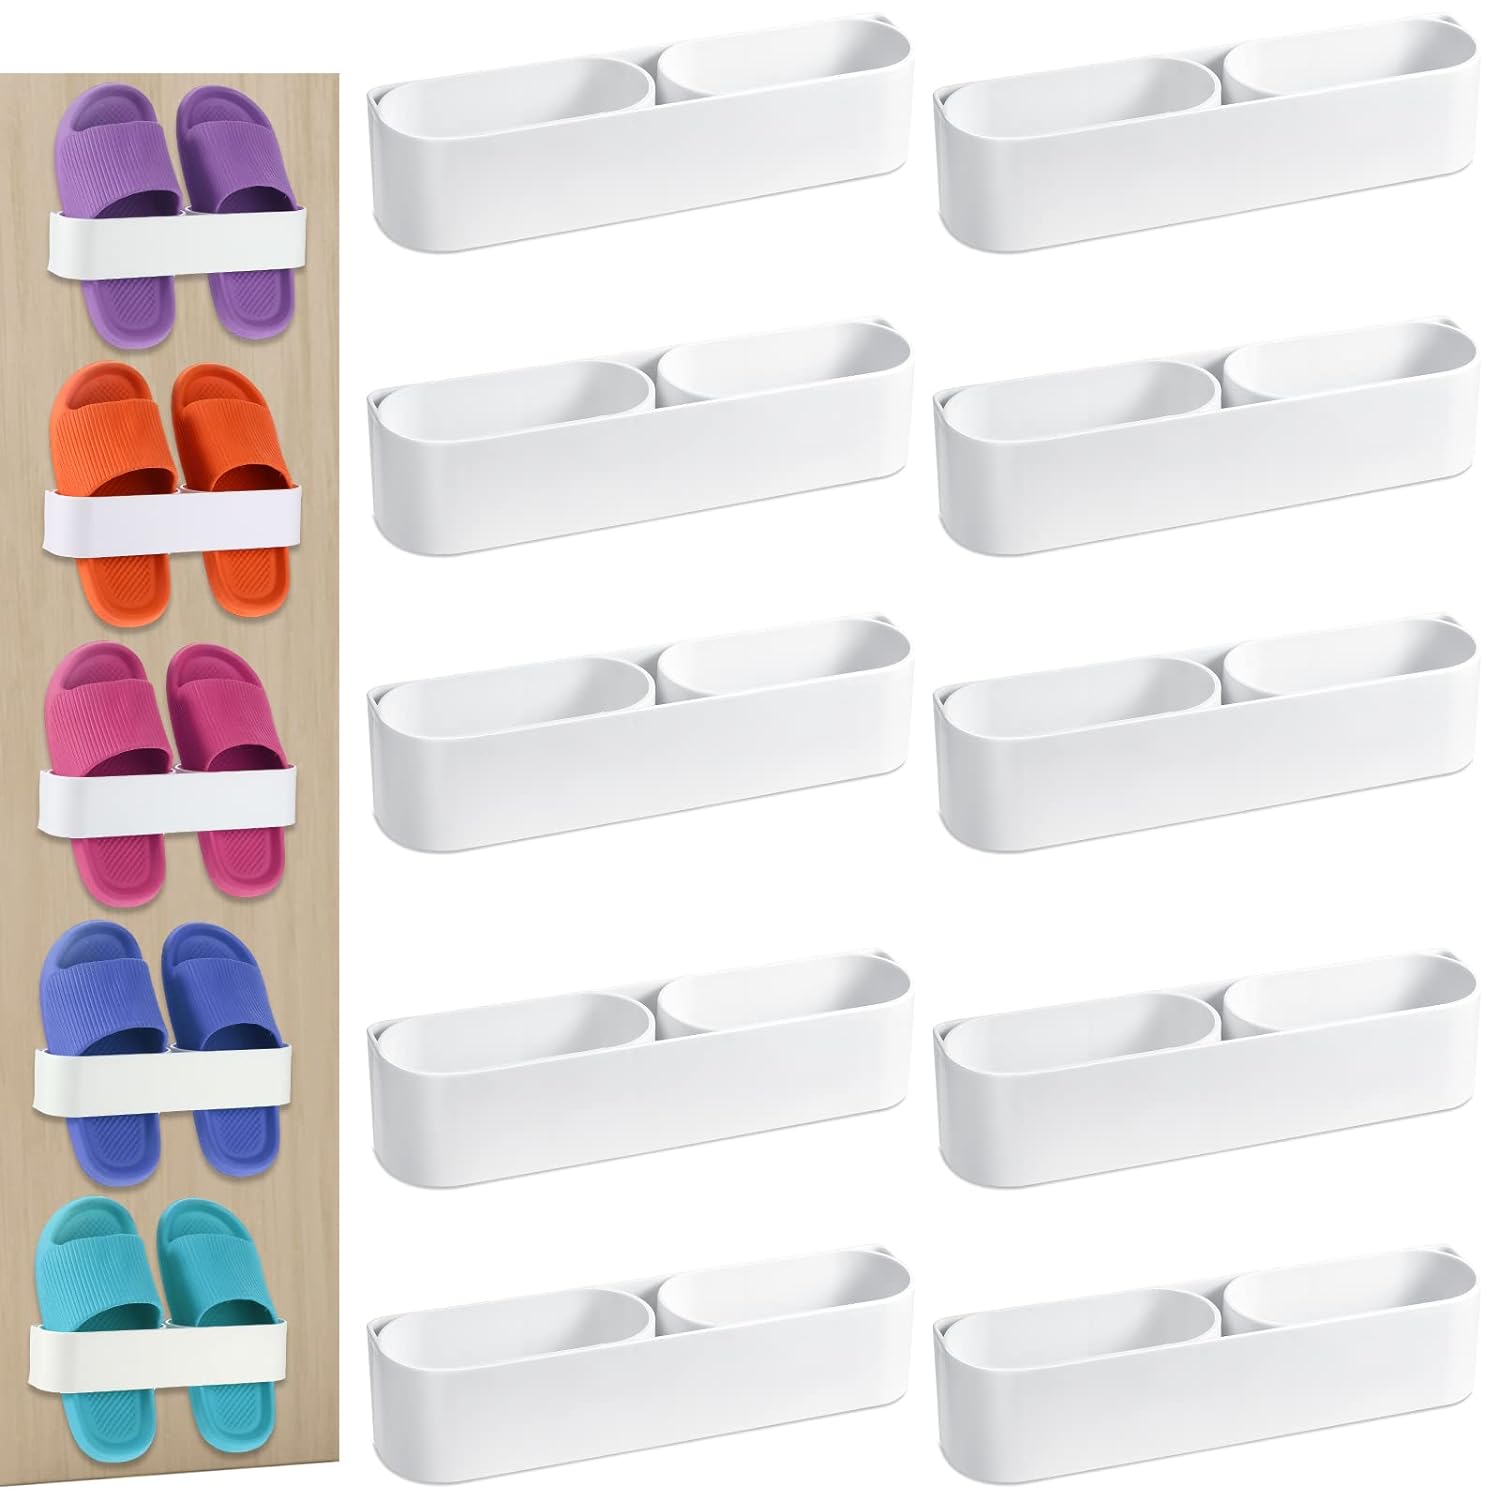 GCP Products 10 Pcs Wall Mounted Shoe Rack Plastic Shoes